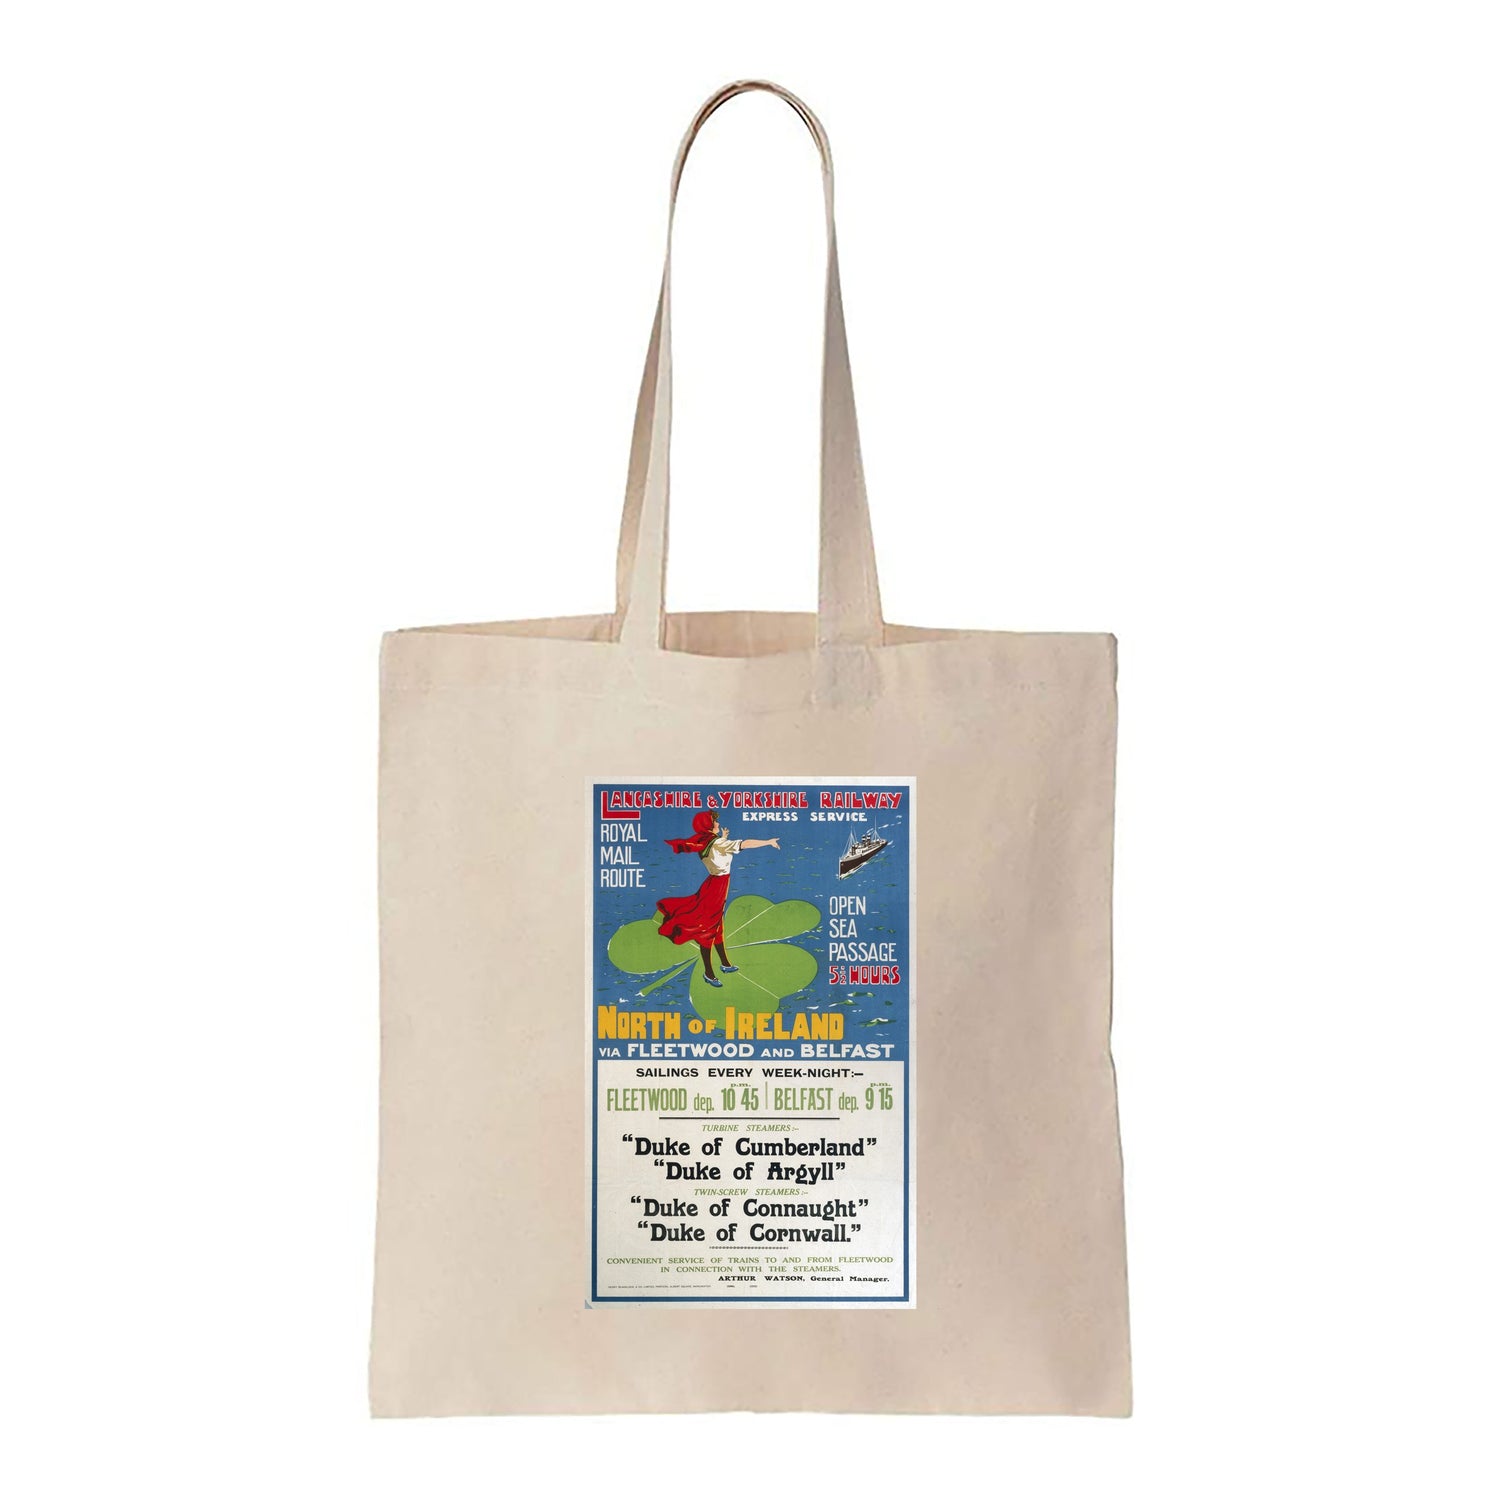 Lancashire and Yorkshire Railway, North of Ireland - Canvas Tote Bag